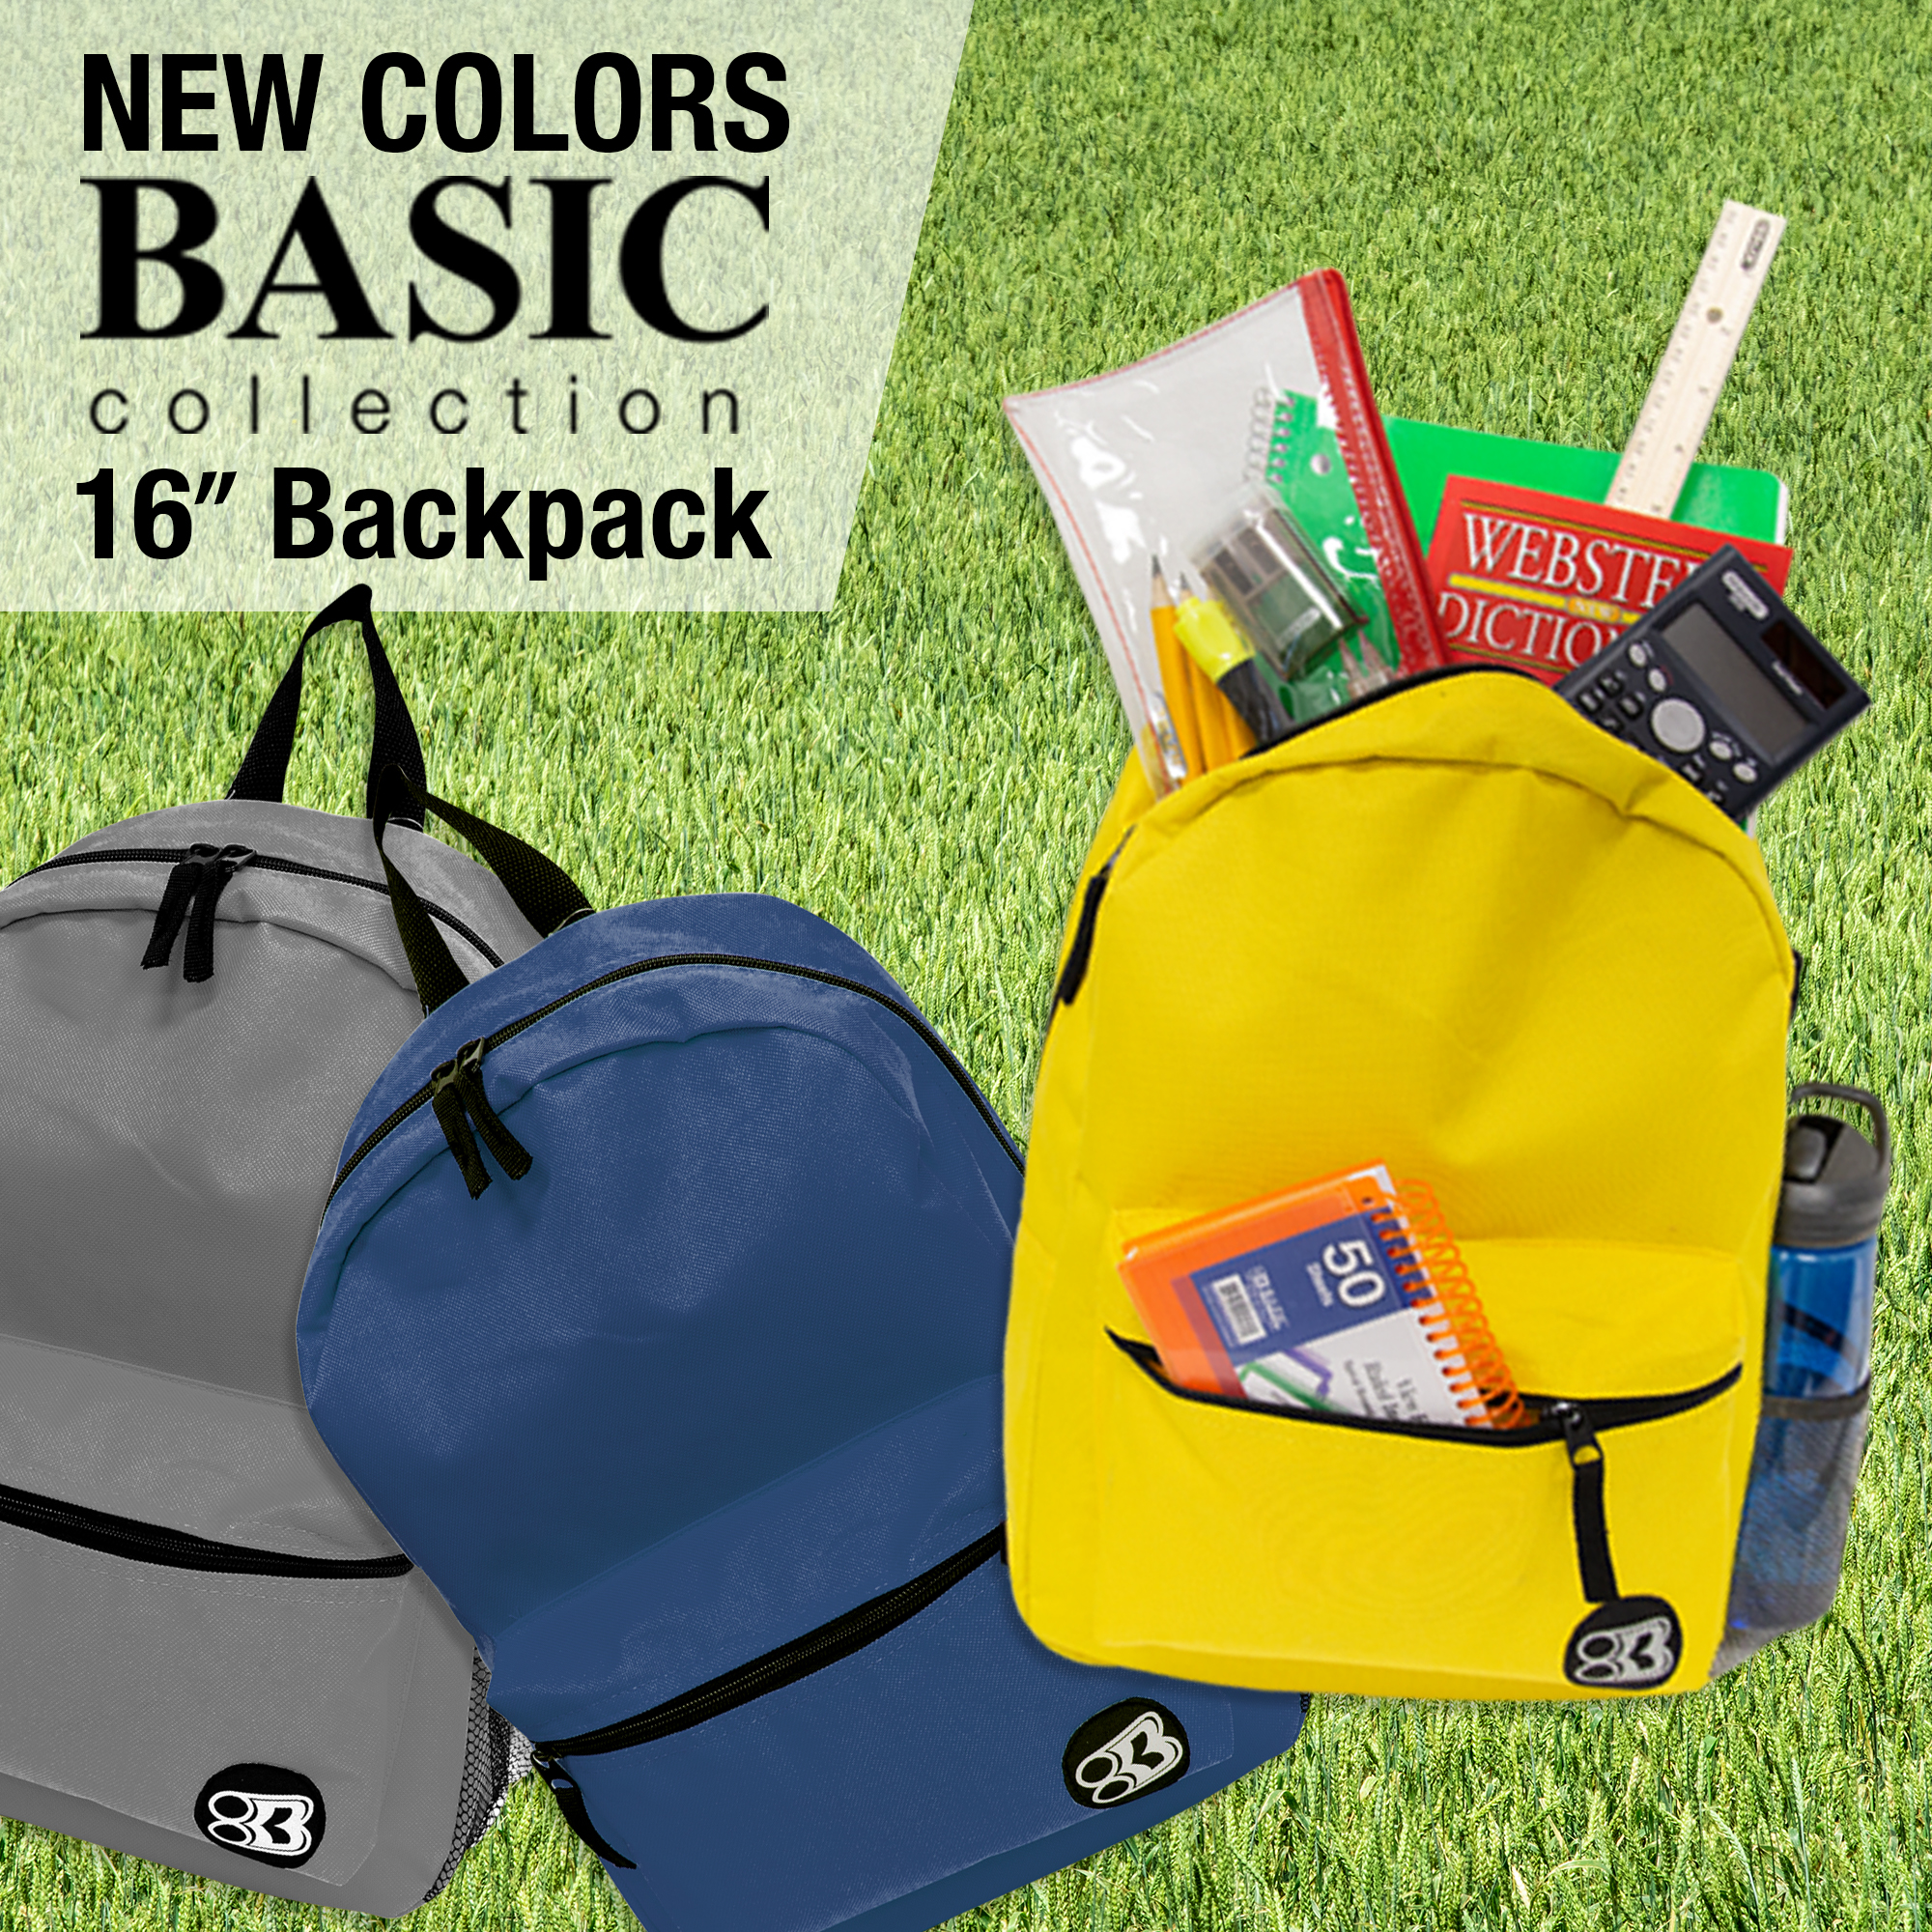 BAZIC School Backpack Basic 16" Mustard, School Bag for Students, 1-Pack - image 2 of 7